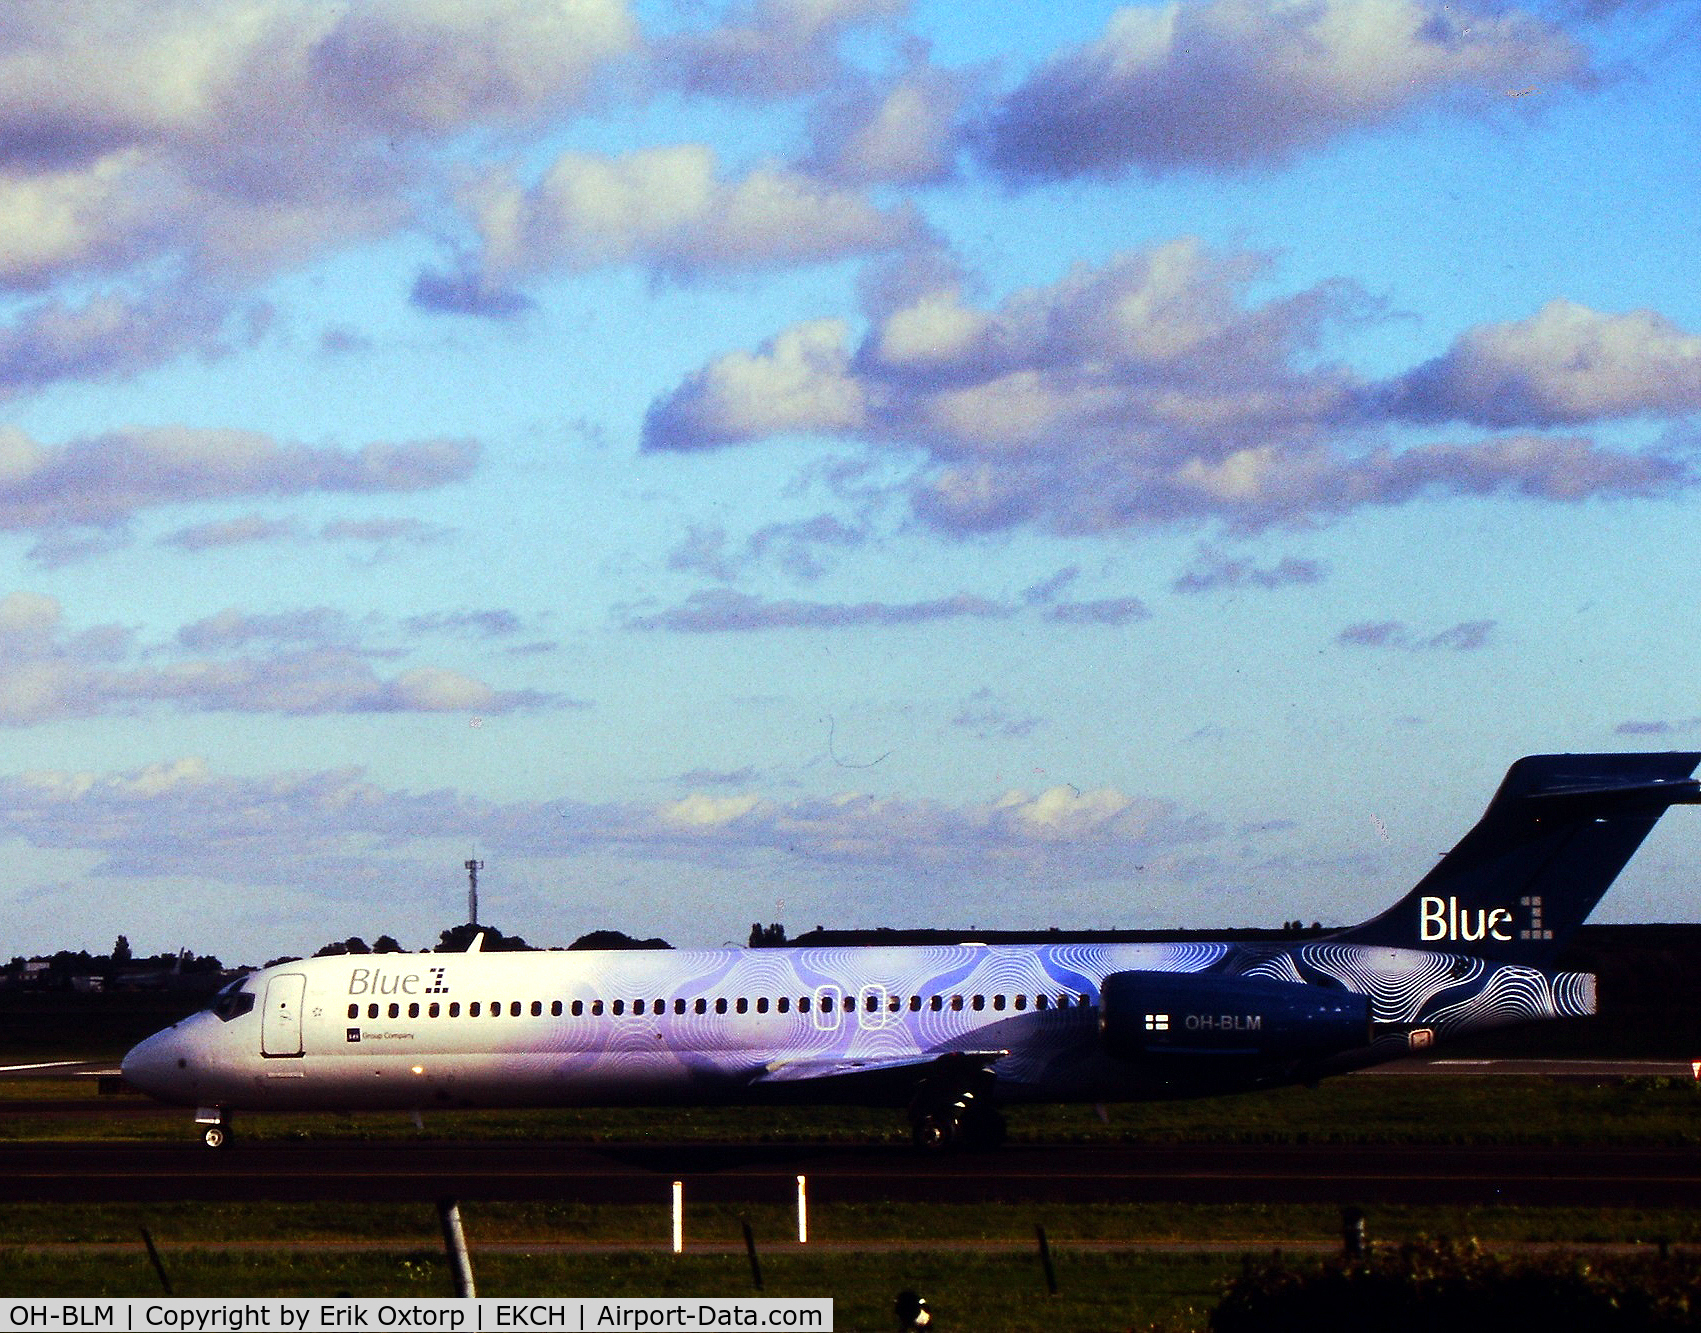 OH-BLM, 2001 Boeing 717-23S C/N 55066, OH-BLM landed rw 04L